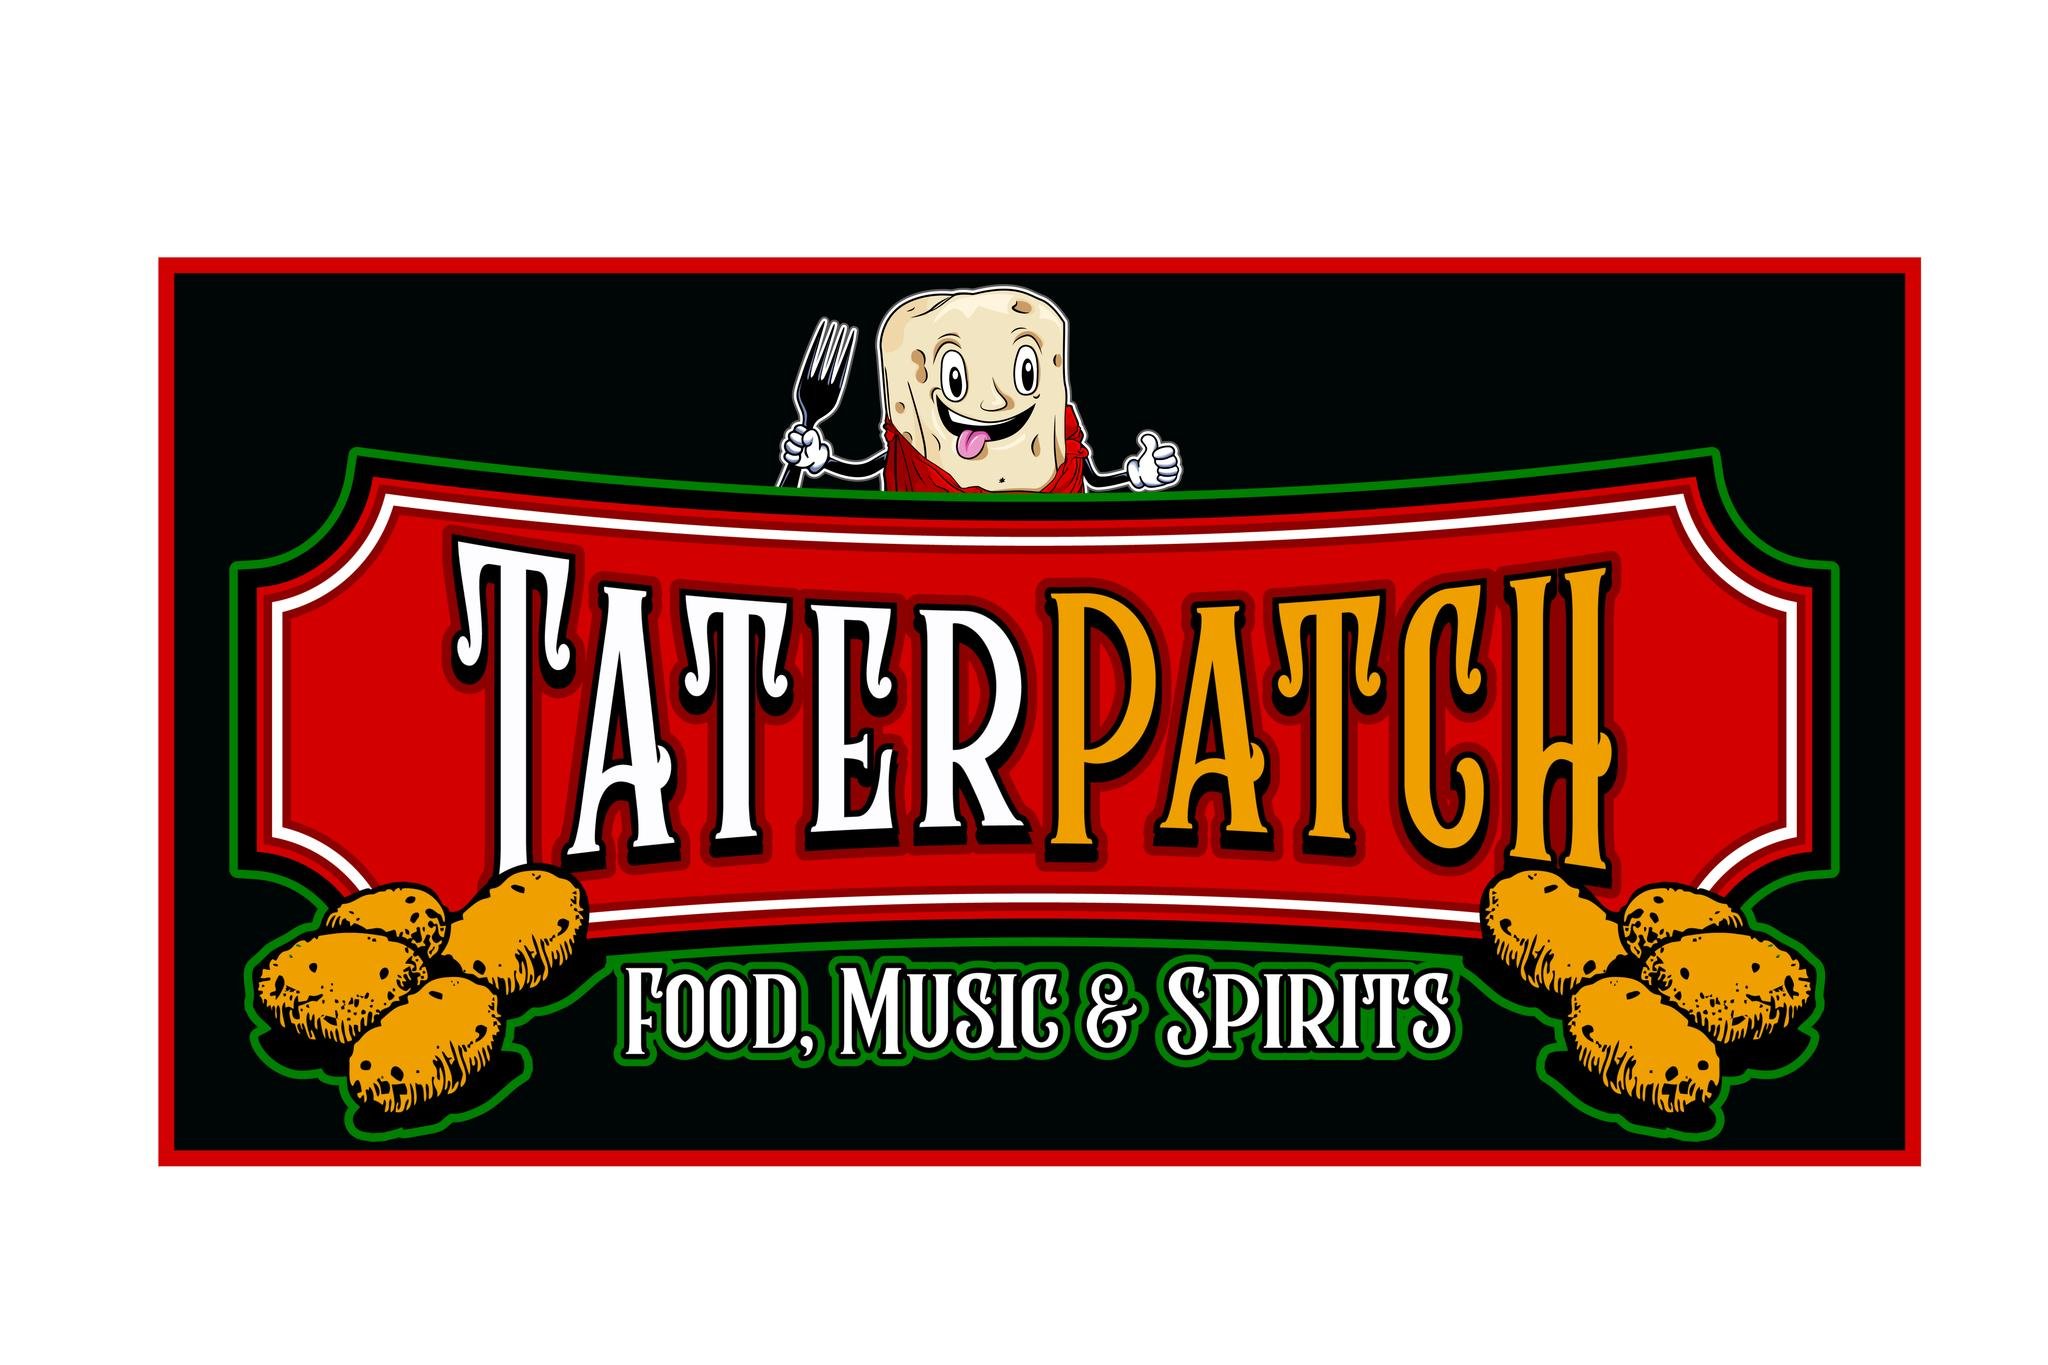 Rob & Kricket's Tater Patch